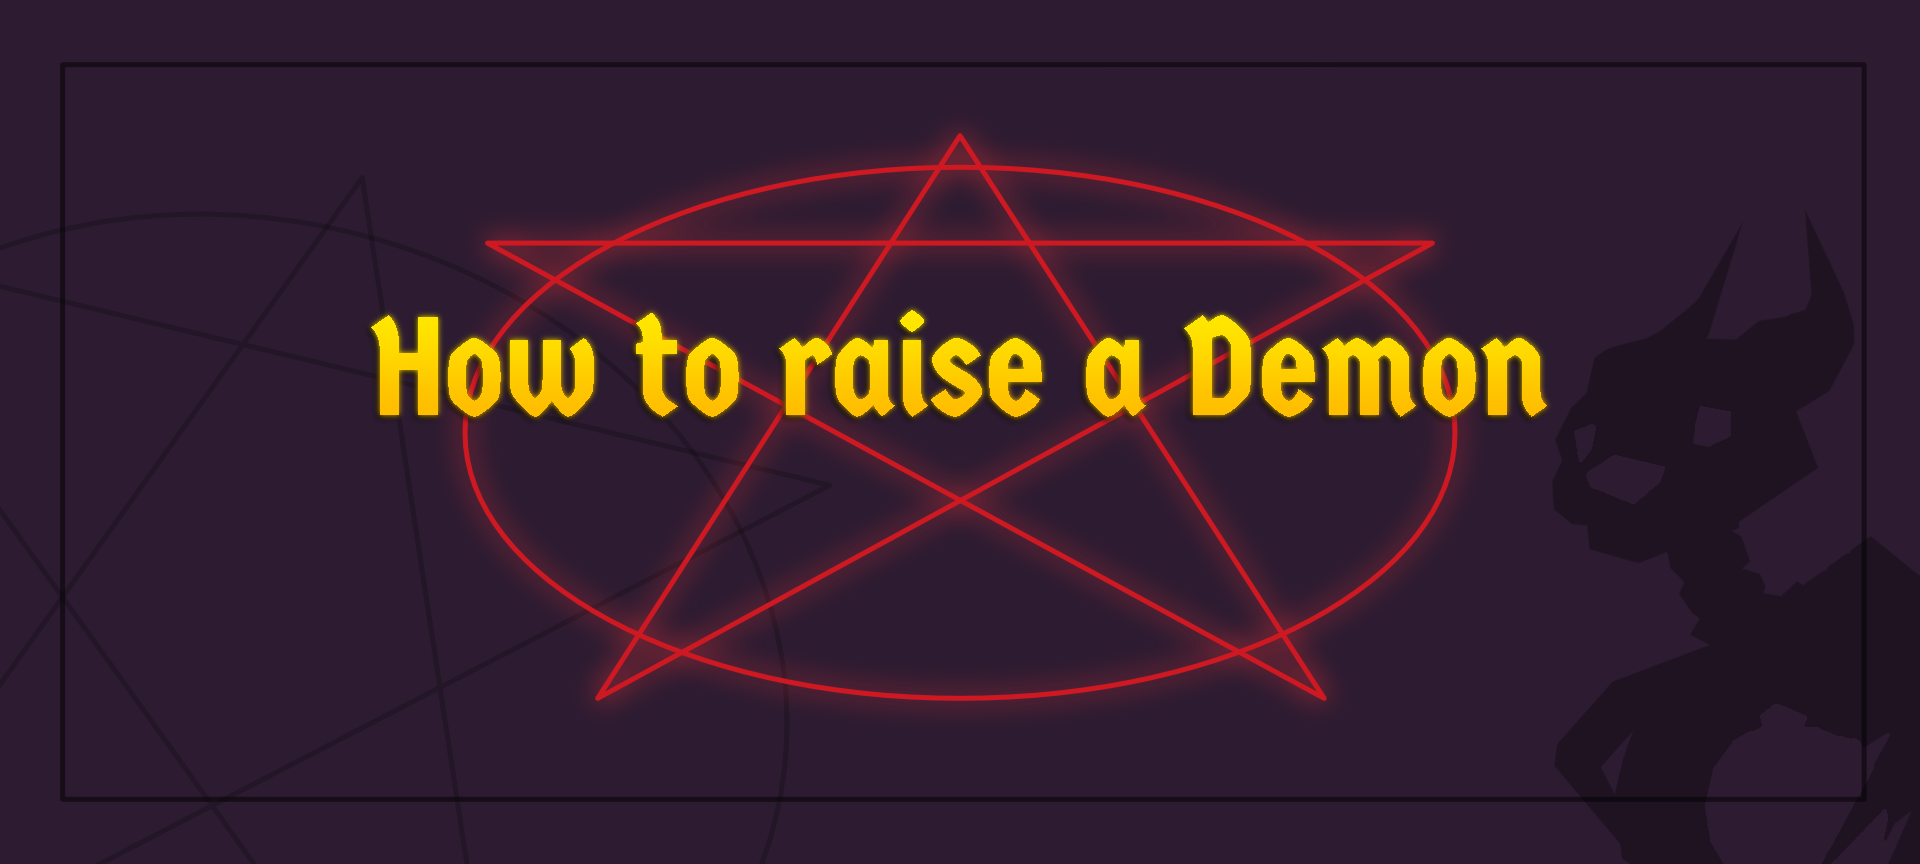 How to raise a demon